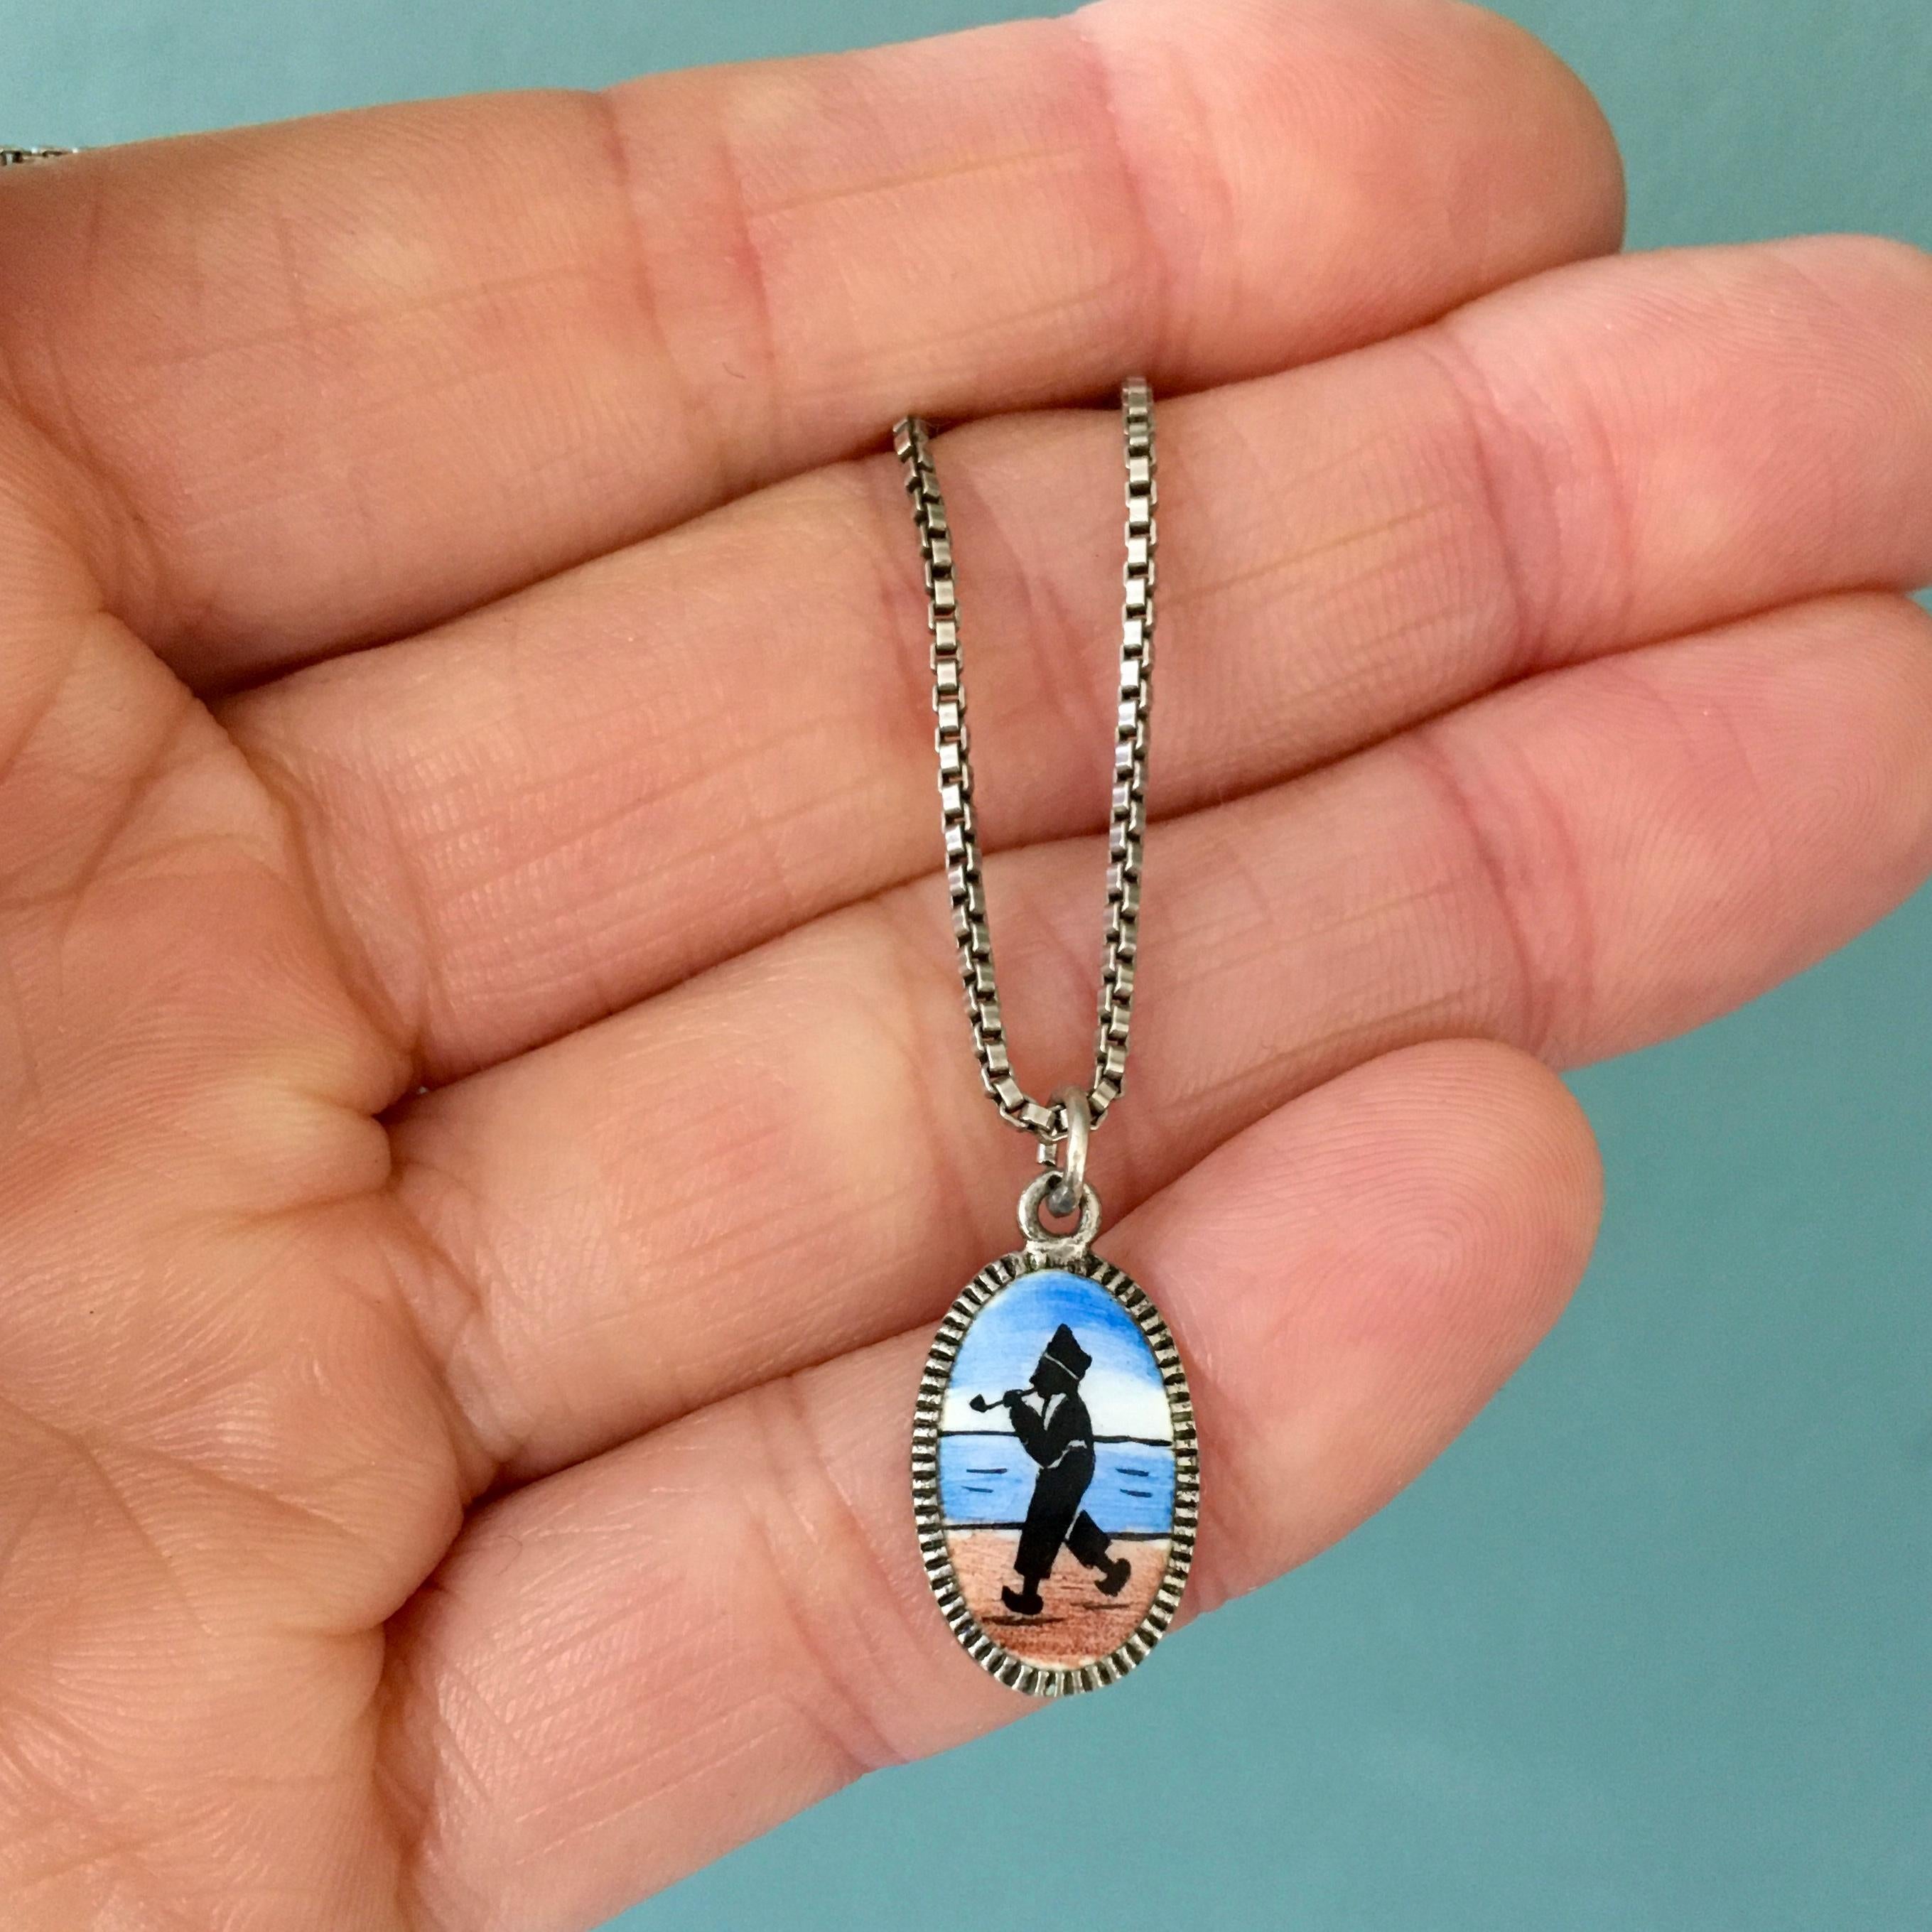 This beachcomber is searching for a new home! Maybe with you? Or with a loved one as a beautiful gift.
He is a silver and enameled oval charm of a Dutch beachcomber. This charm is the perfect addition to a charm bracelet or necklace. This charm